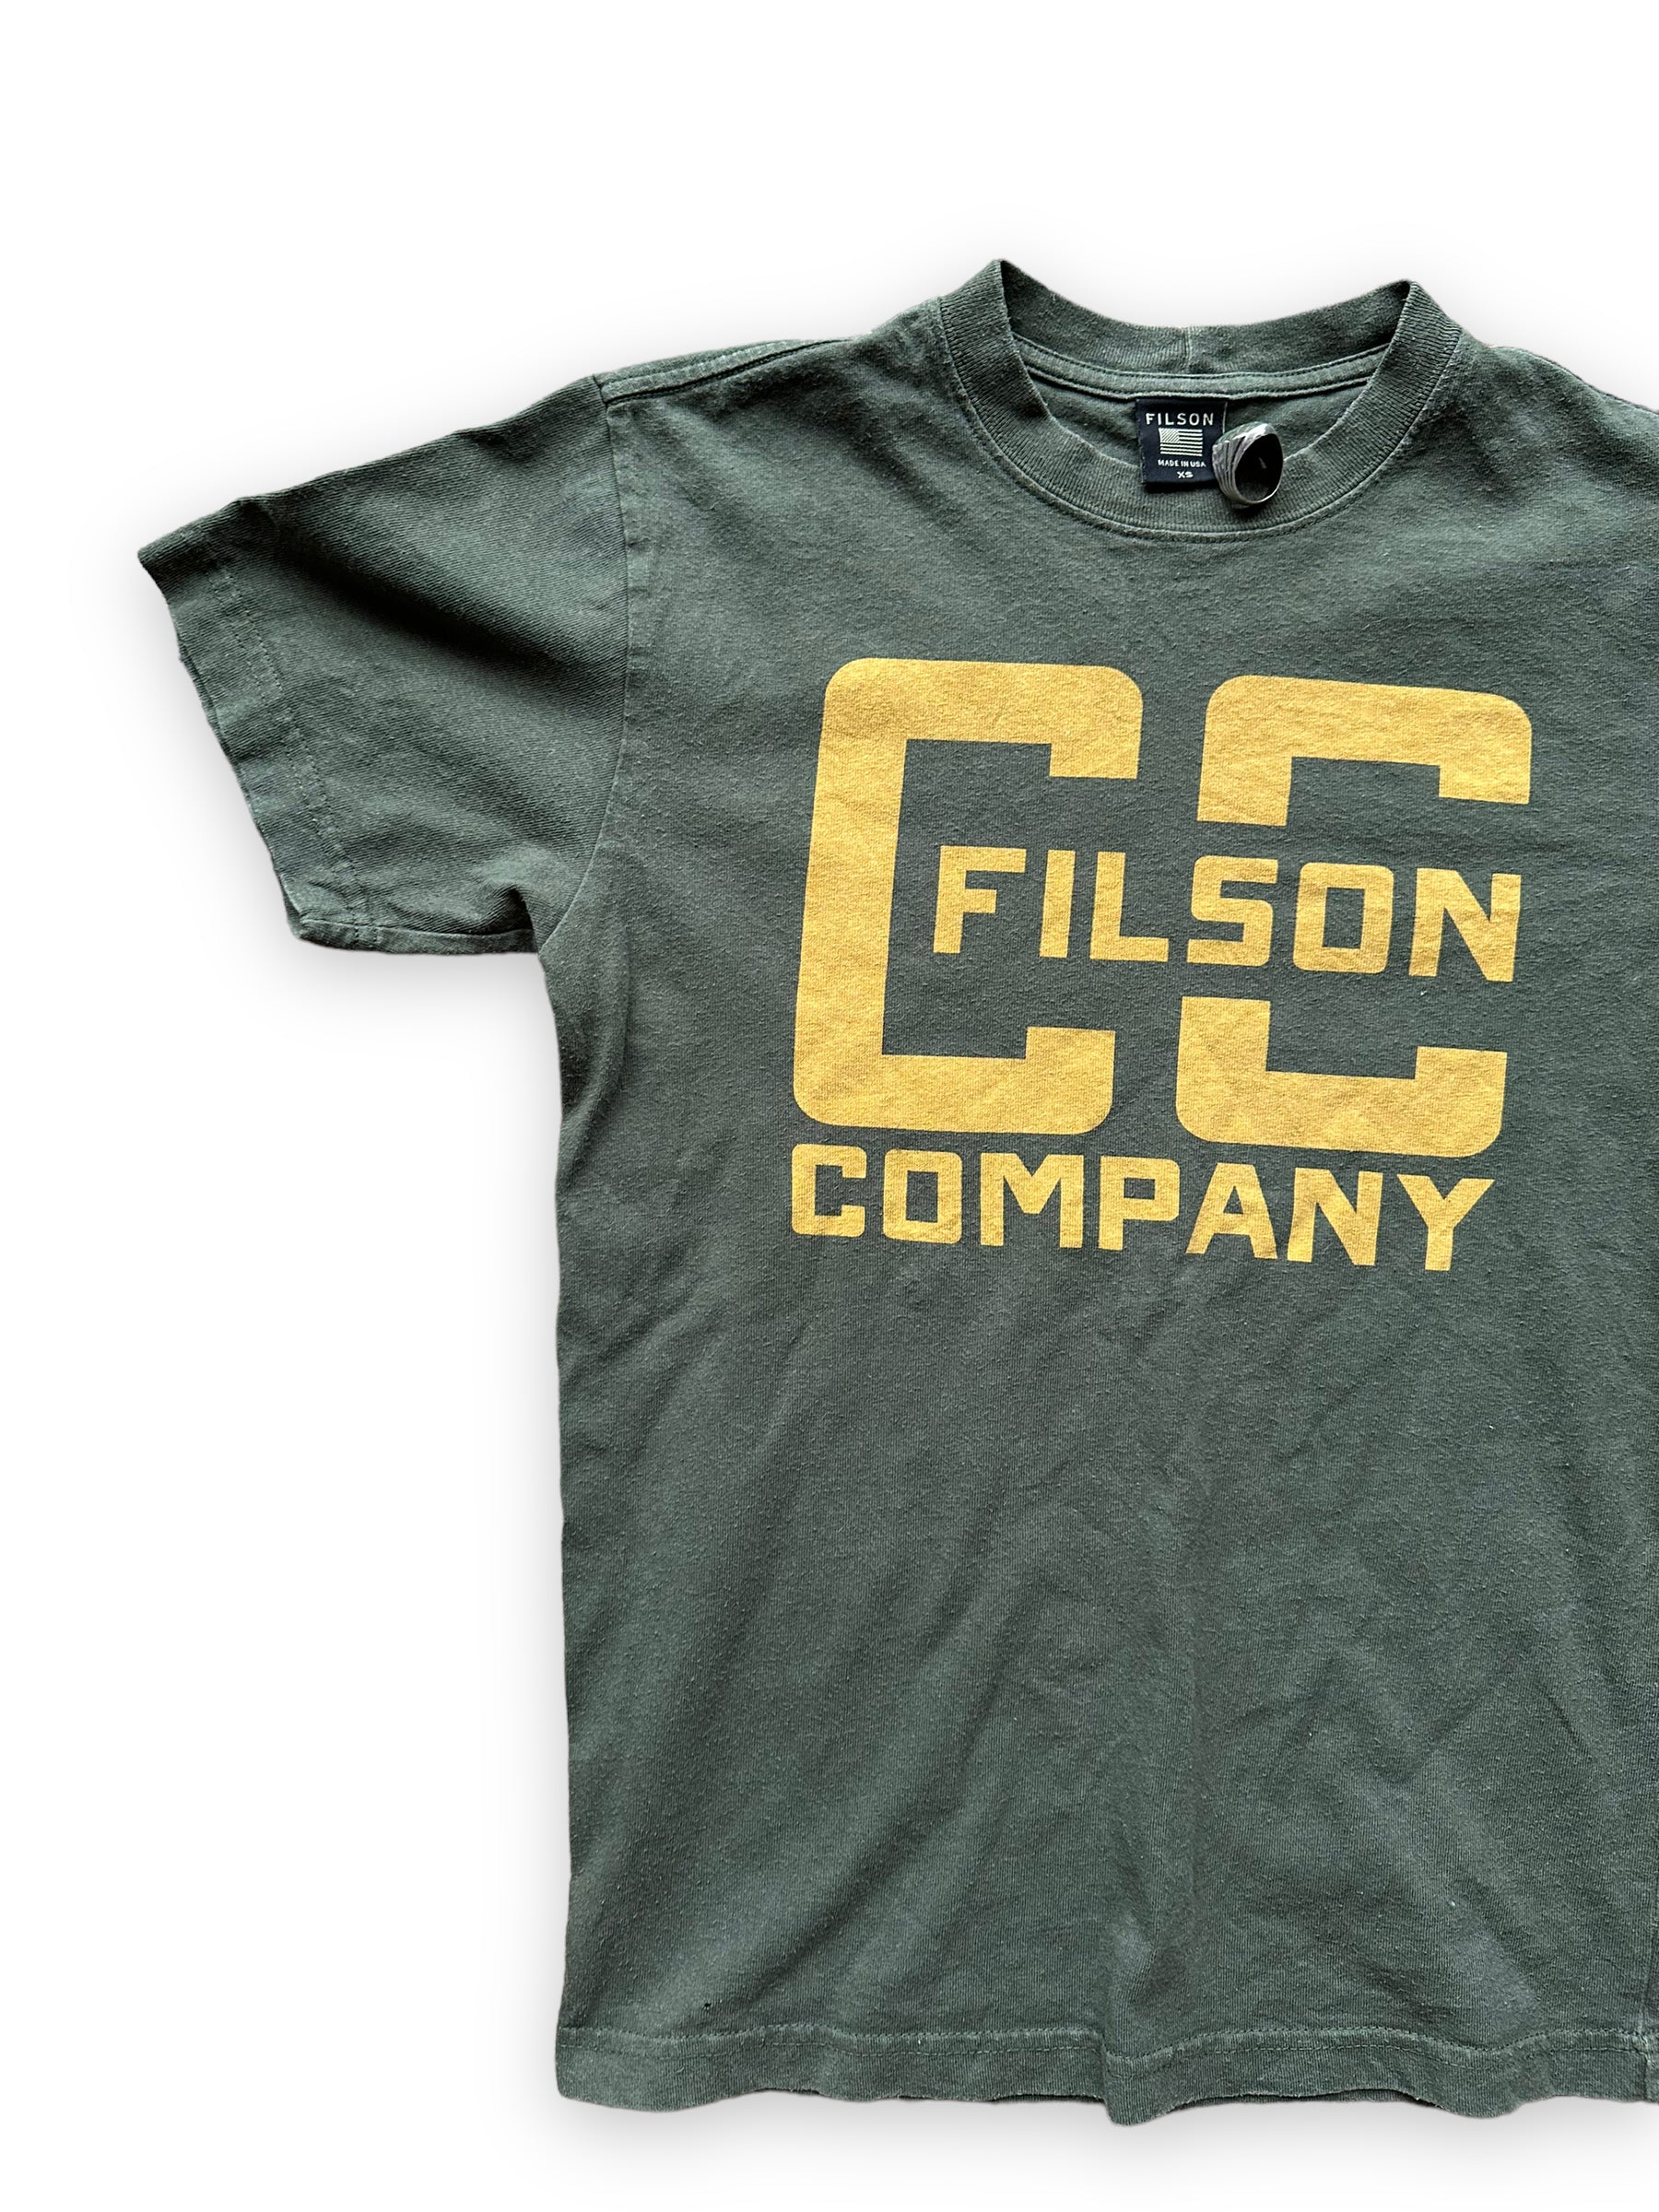 Front Right View of Olive Green Filson Cotton Tee SZ XS  |  Barn Owl Vintage Goods | Filson Graphic Tees Seattle